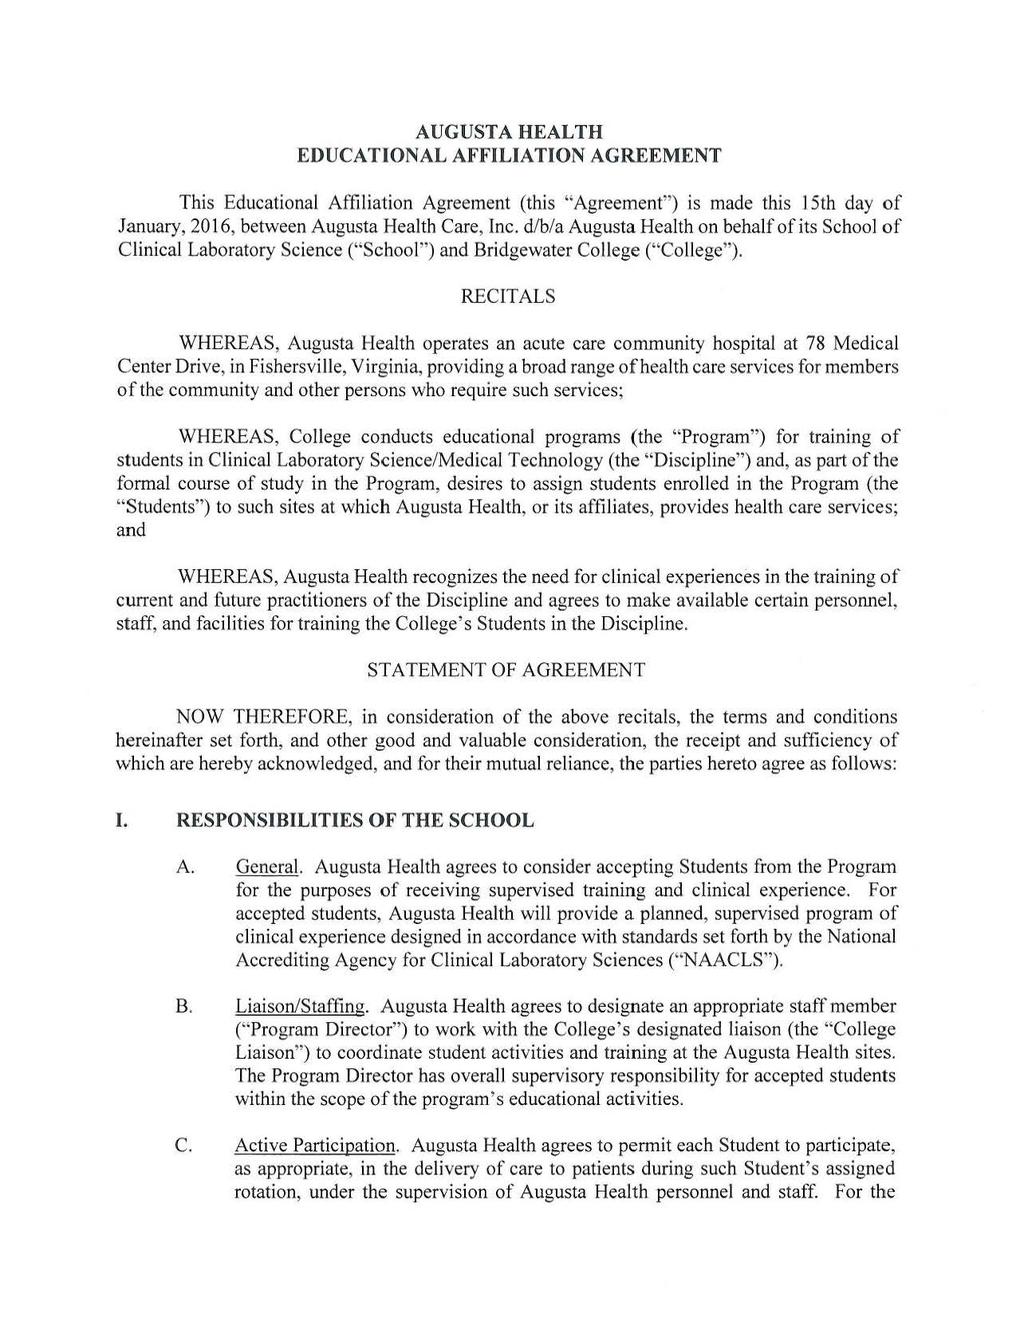 AUGUSTA HEALTH EDUCATIONAL AFFILIATION AGREEMENT This Educational Affiliation Agreement (this "Agreement") is made this 15th day of January, 2016, between Augusta Health Care, Inc.